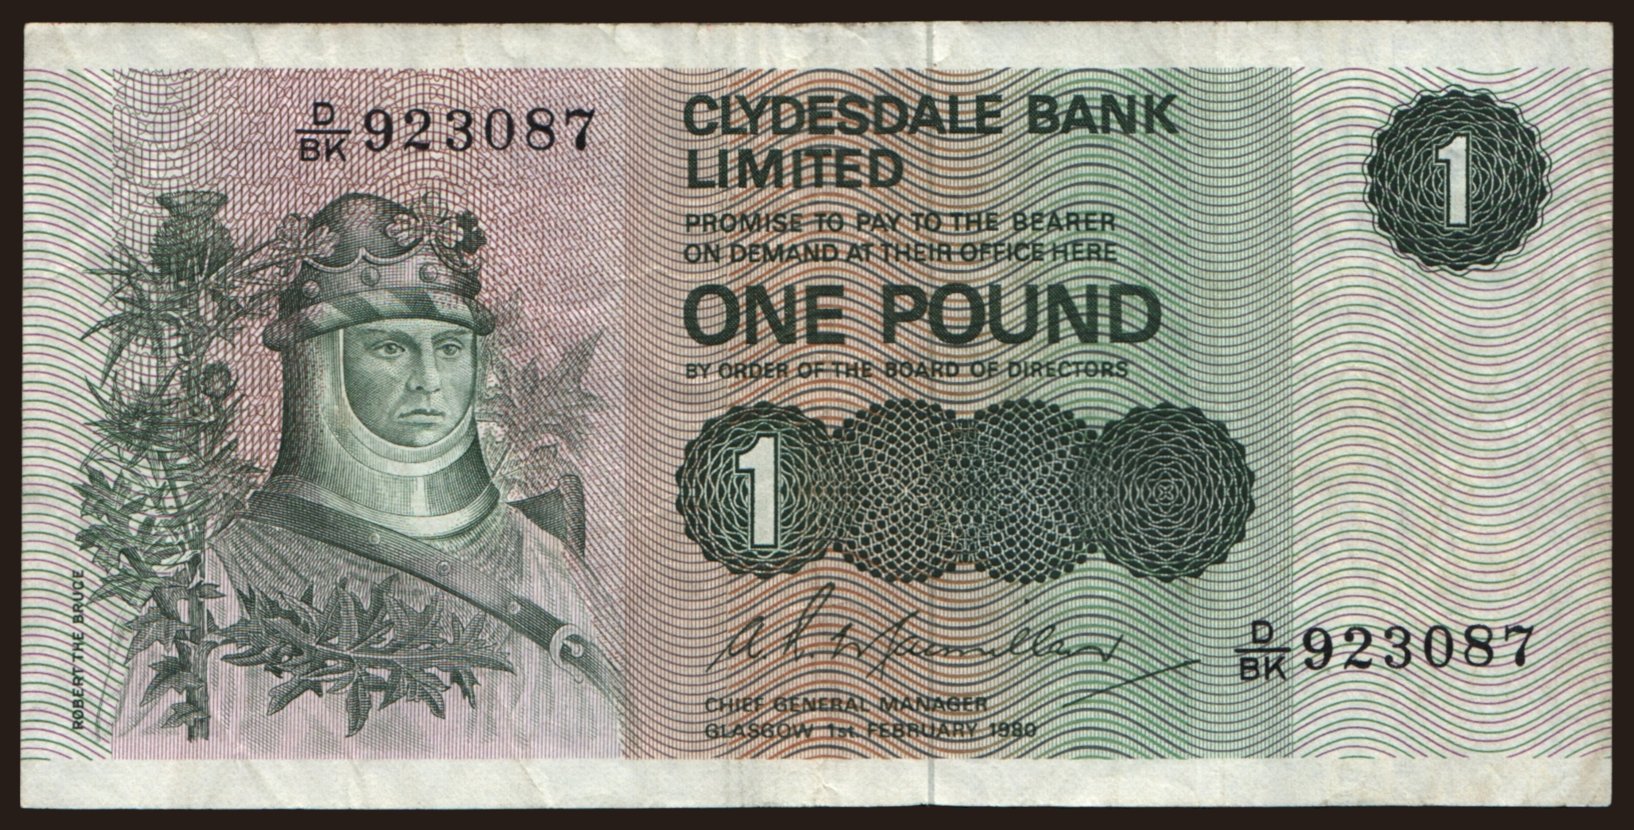 Clydesdale Bank Limited, 1 pound, 1980